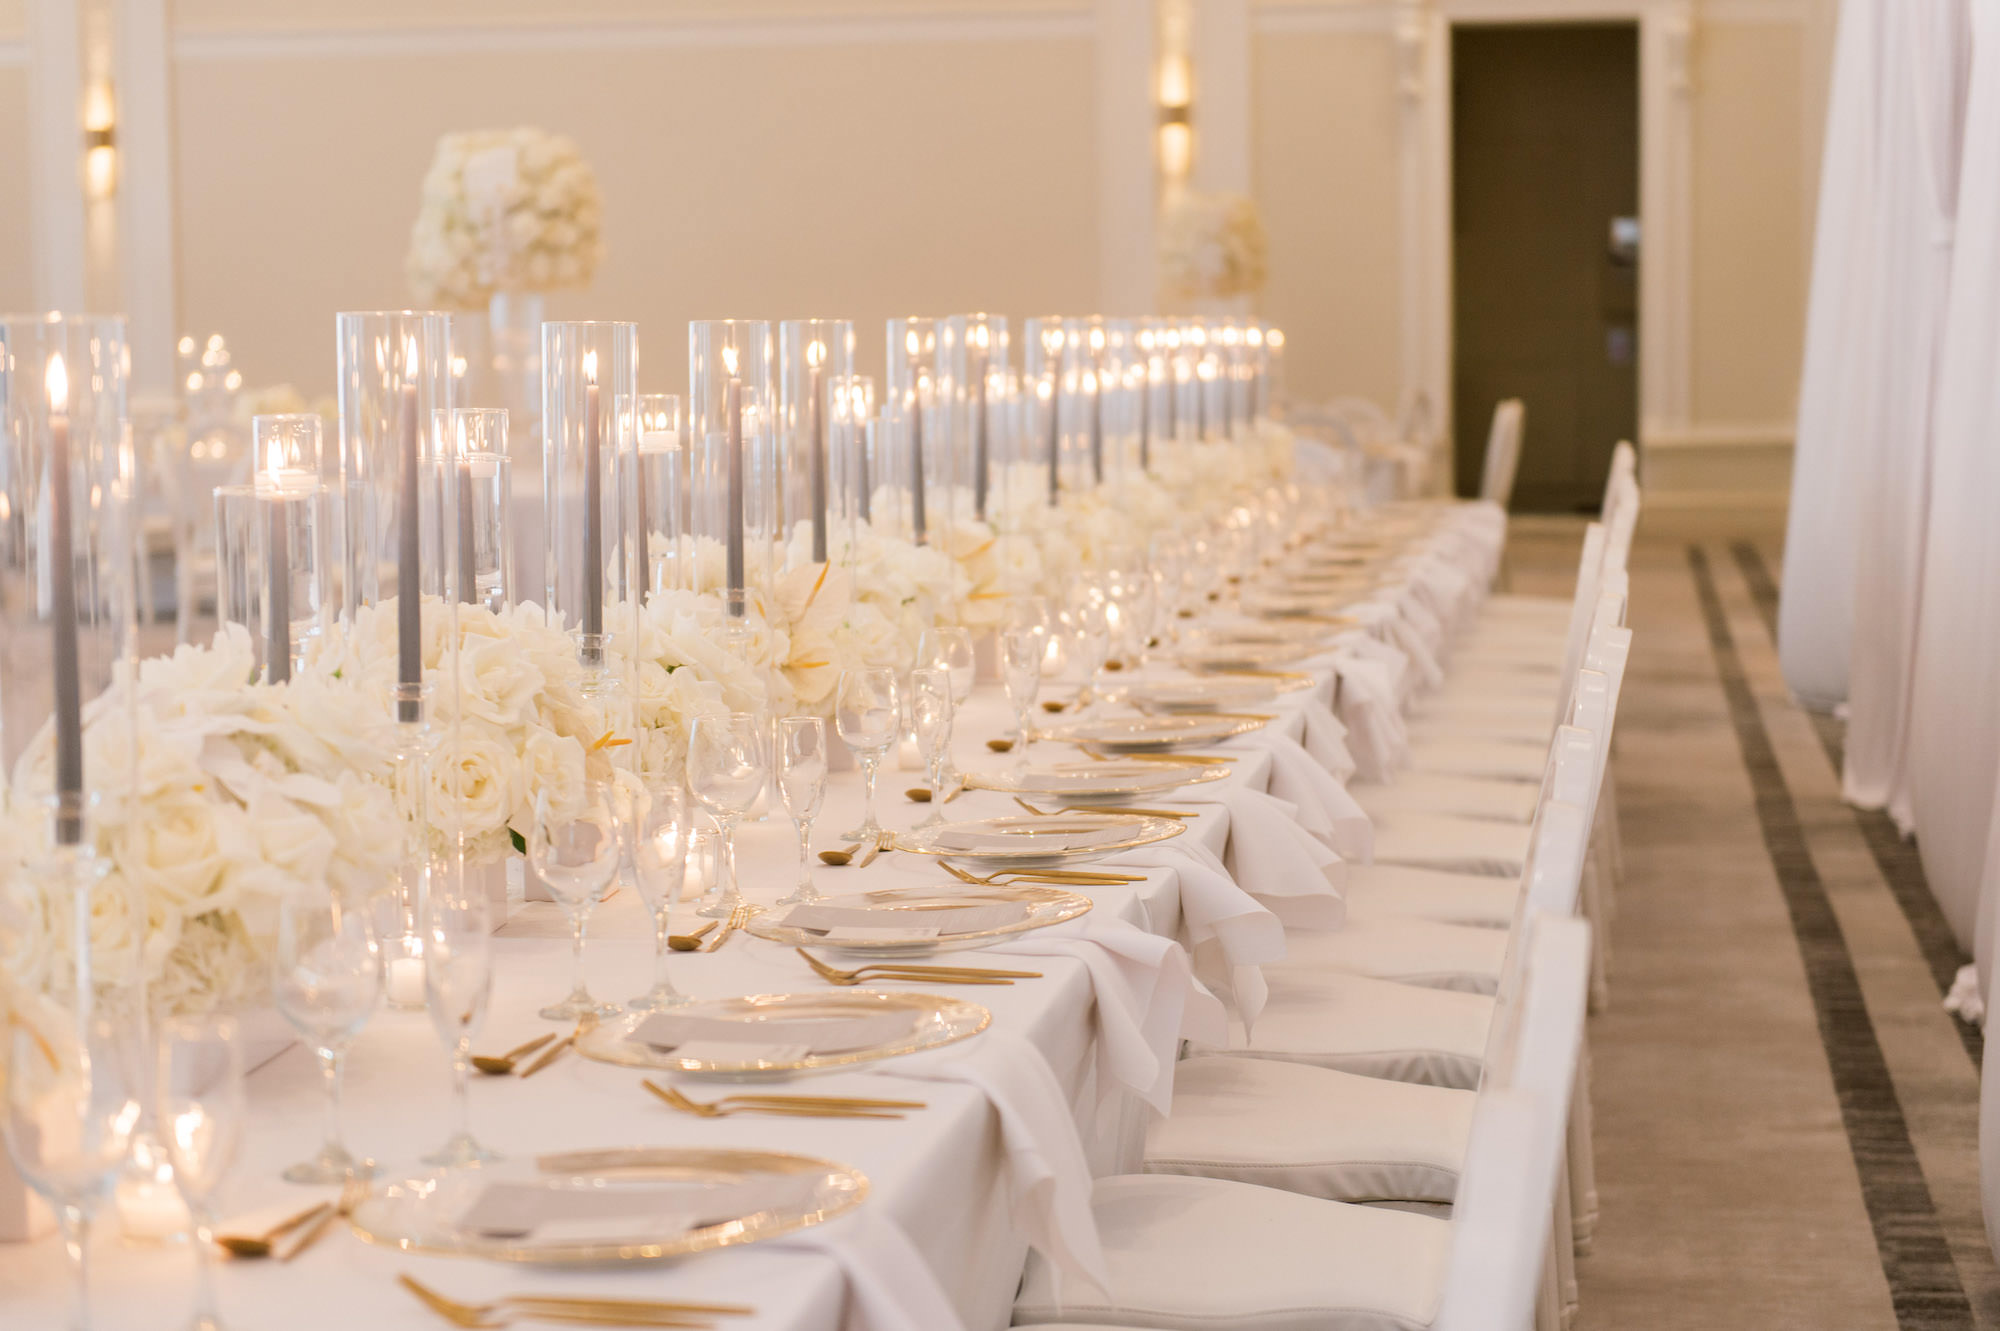 Timeless Classic Wedding Reception Decor, Head Table with Round All White Rose Flower Centerpieces, Tall Candlesticks, Gold Silverware | Tampa Bay Wedding Planner Parties A'la Carte | Wedding Florist Bruce Wayne Florals